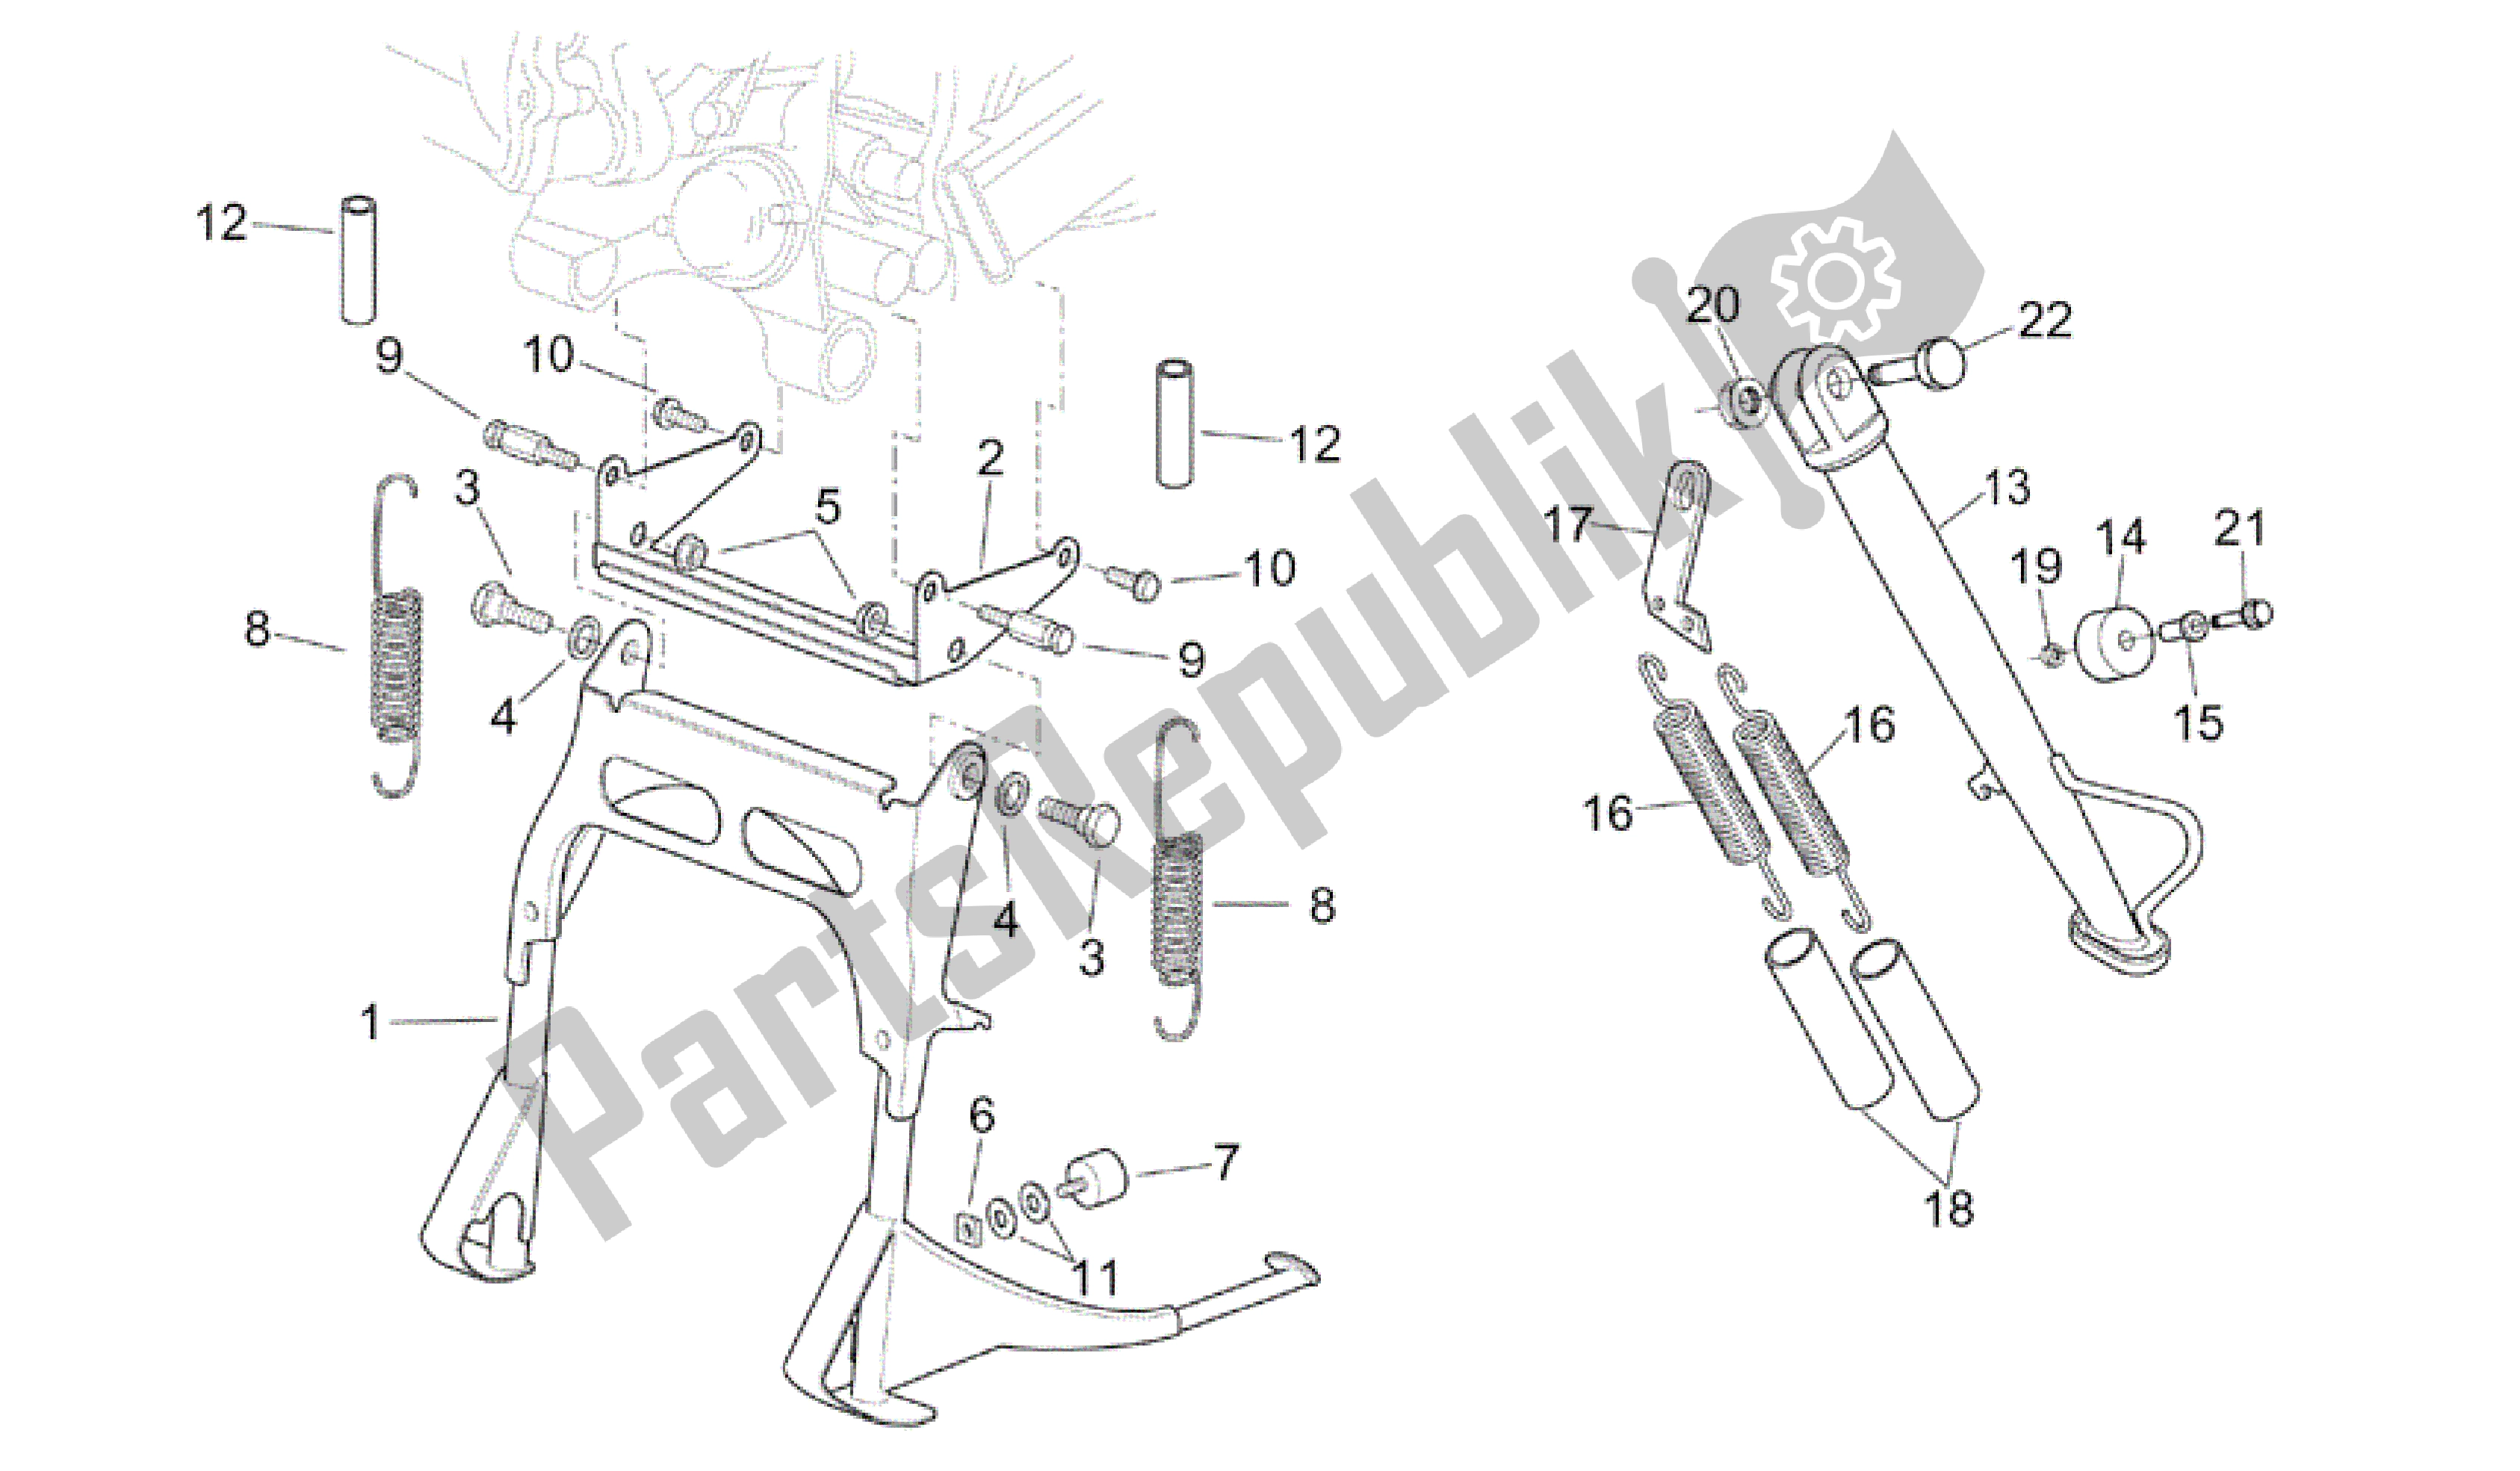 All parts for the Central Stand of the Aprilia Scarabeo 125 1999 - 2004